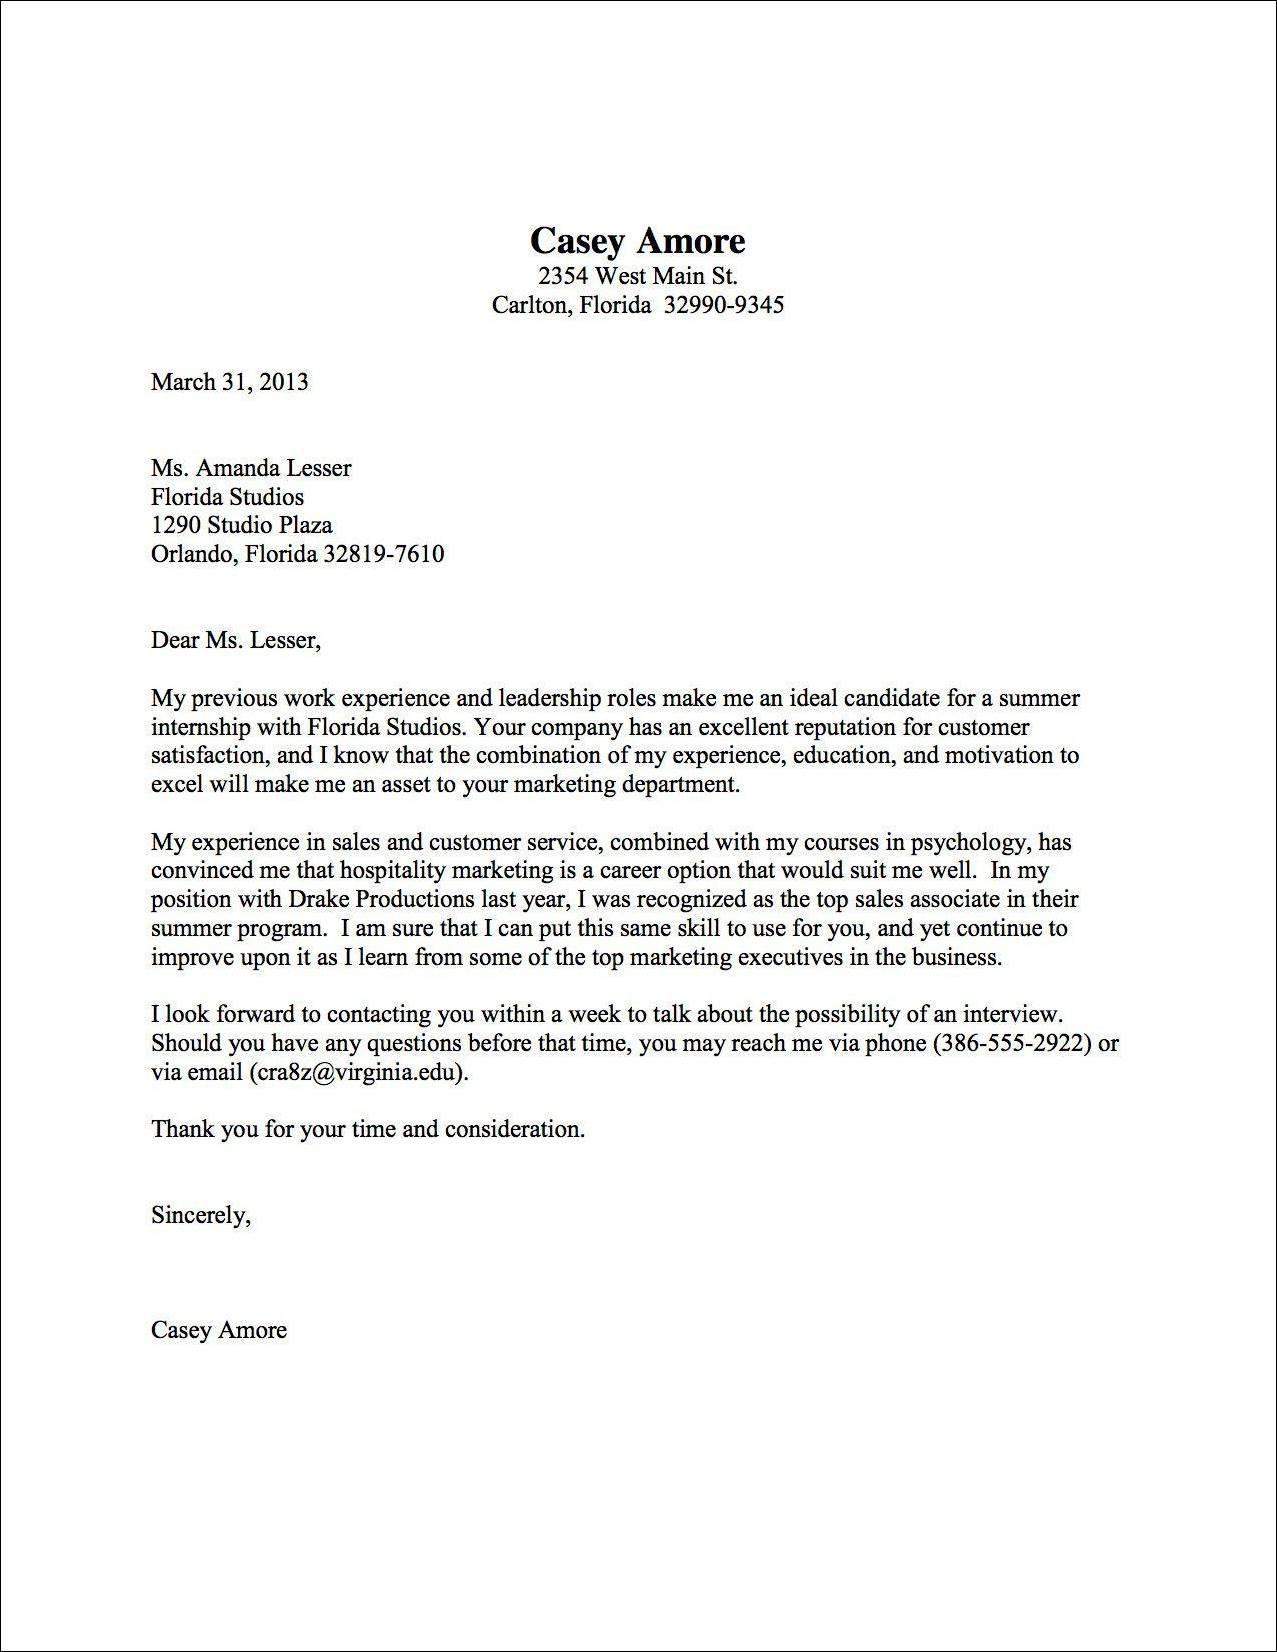 generic cover letter examples